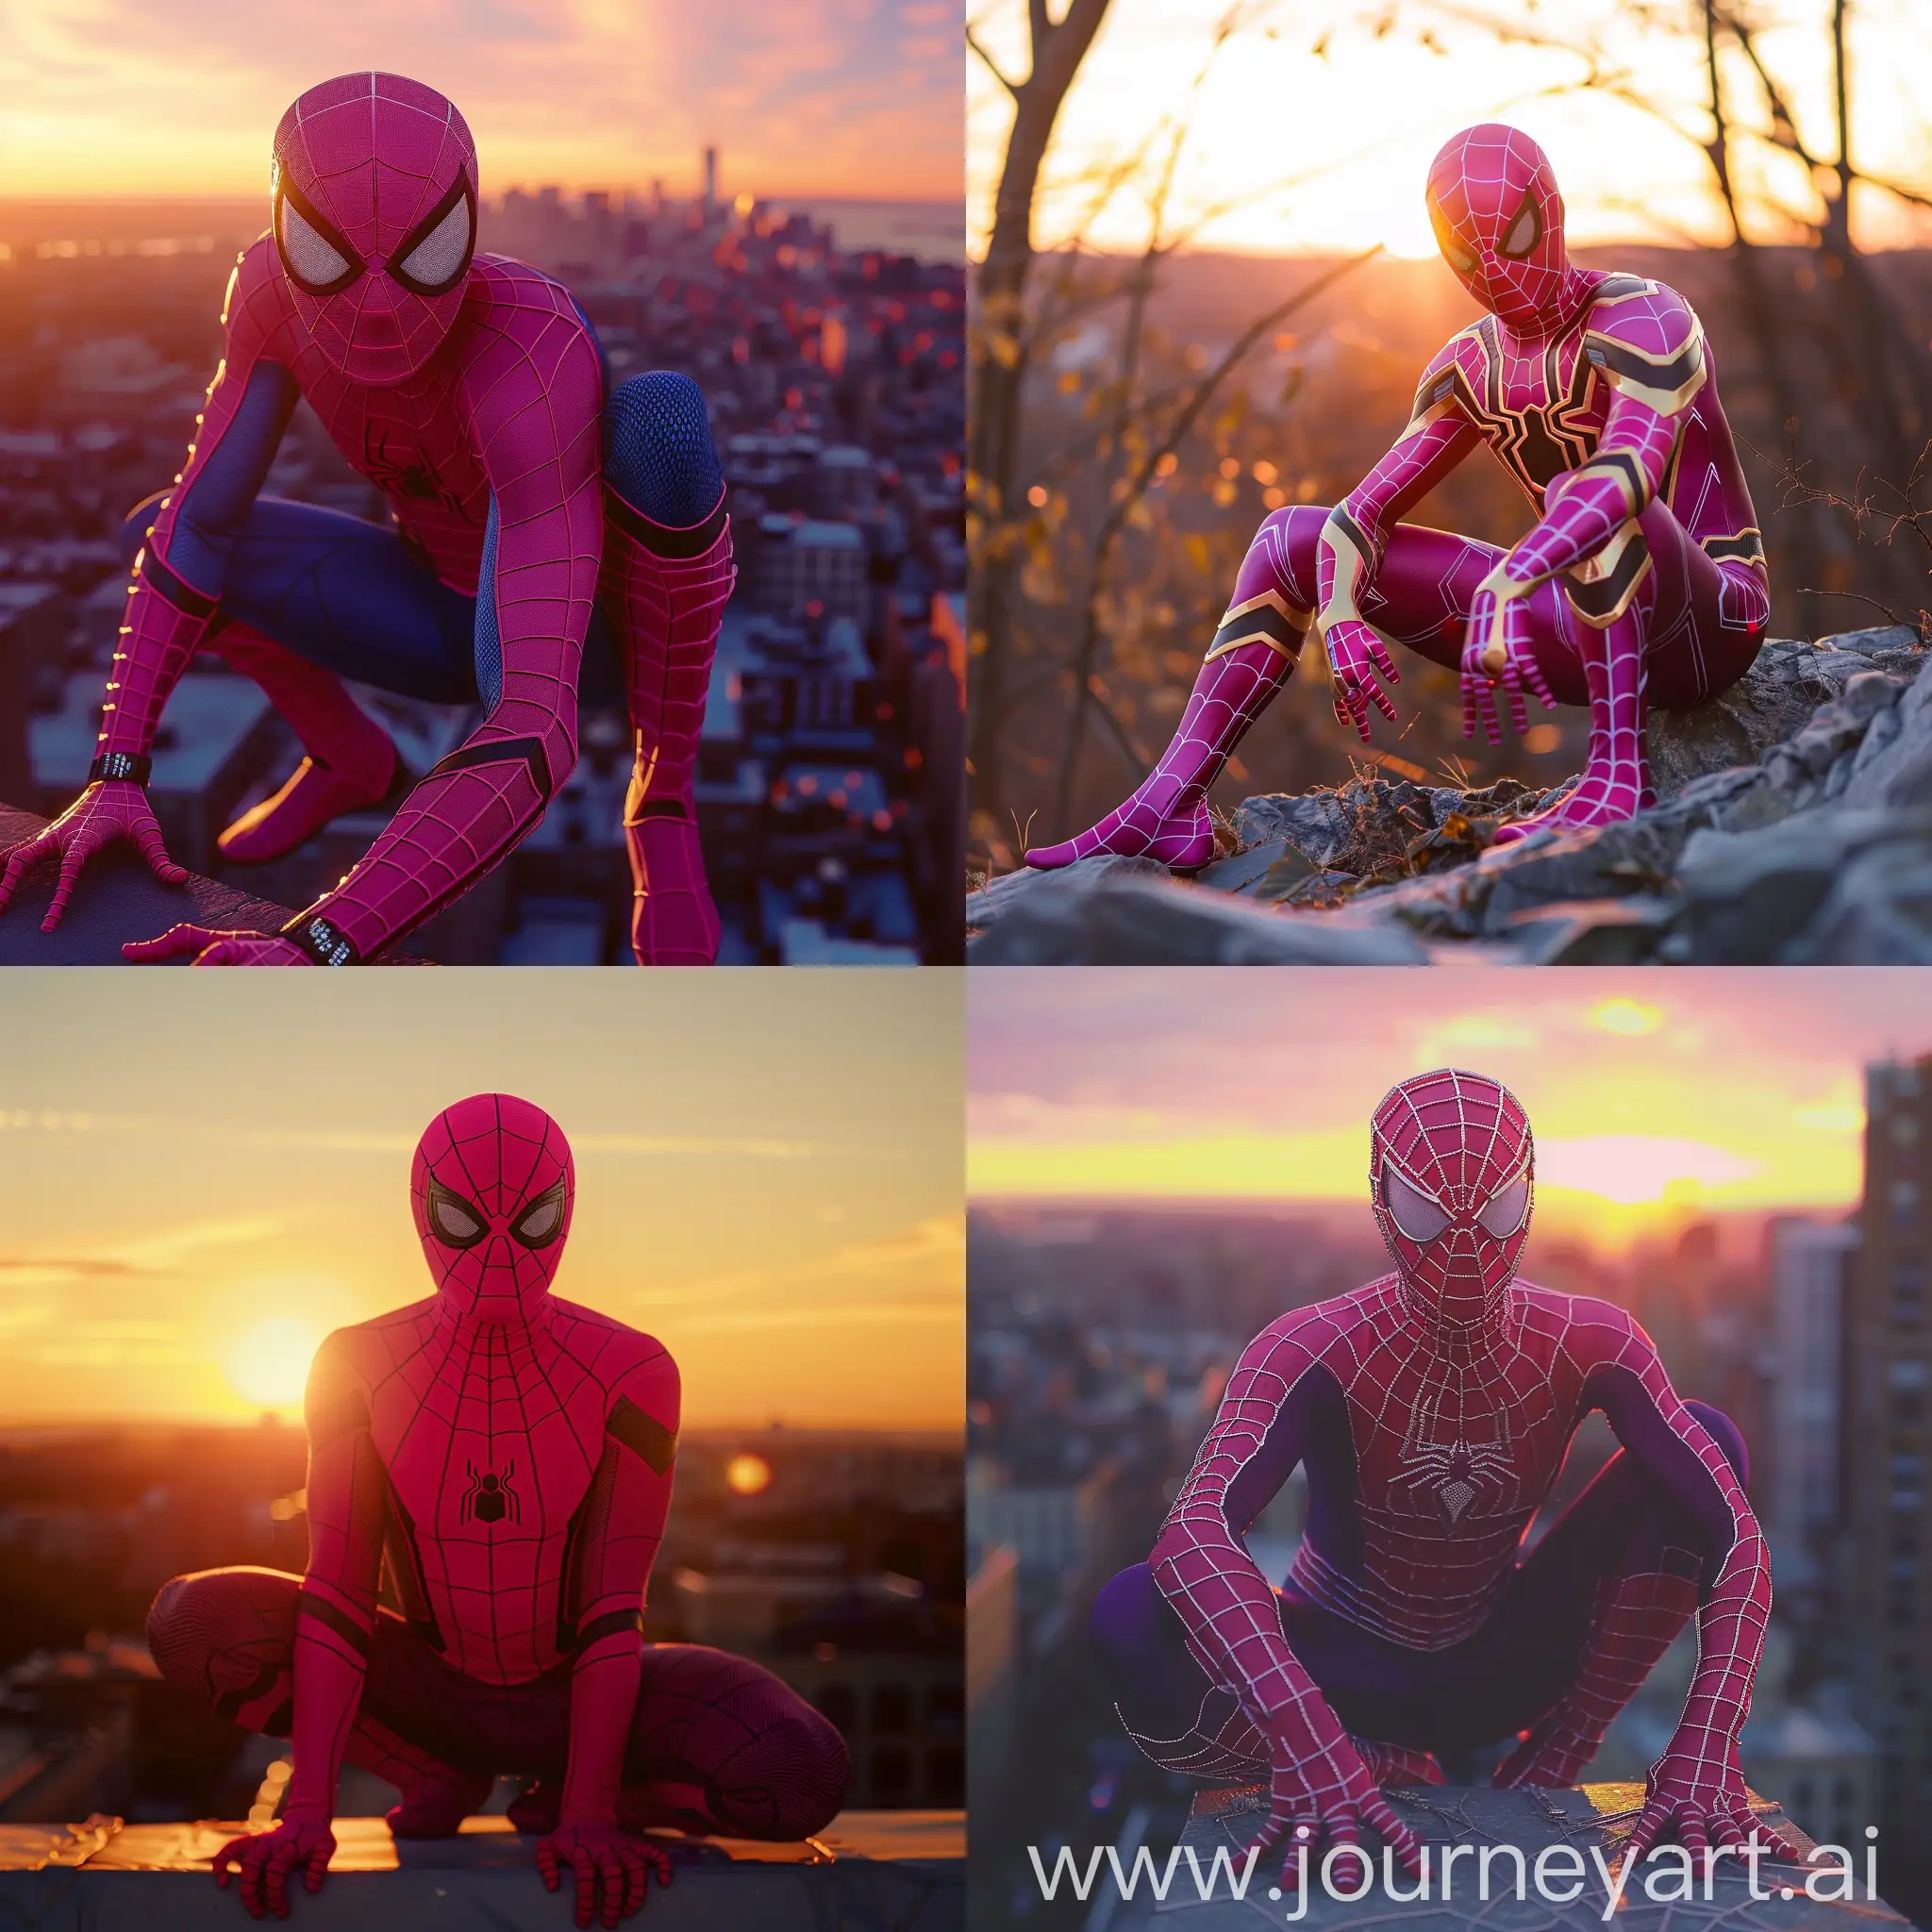 Pink-Spiderman-Silhouetted-Against-Sunset-Sky